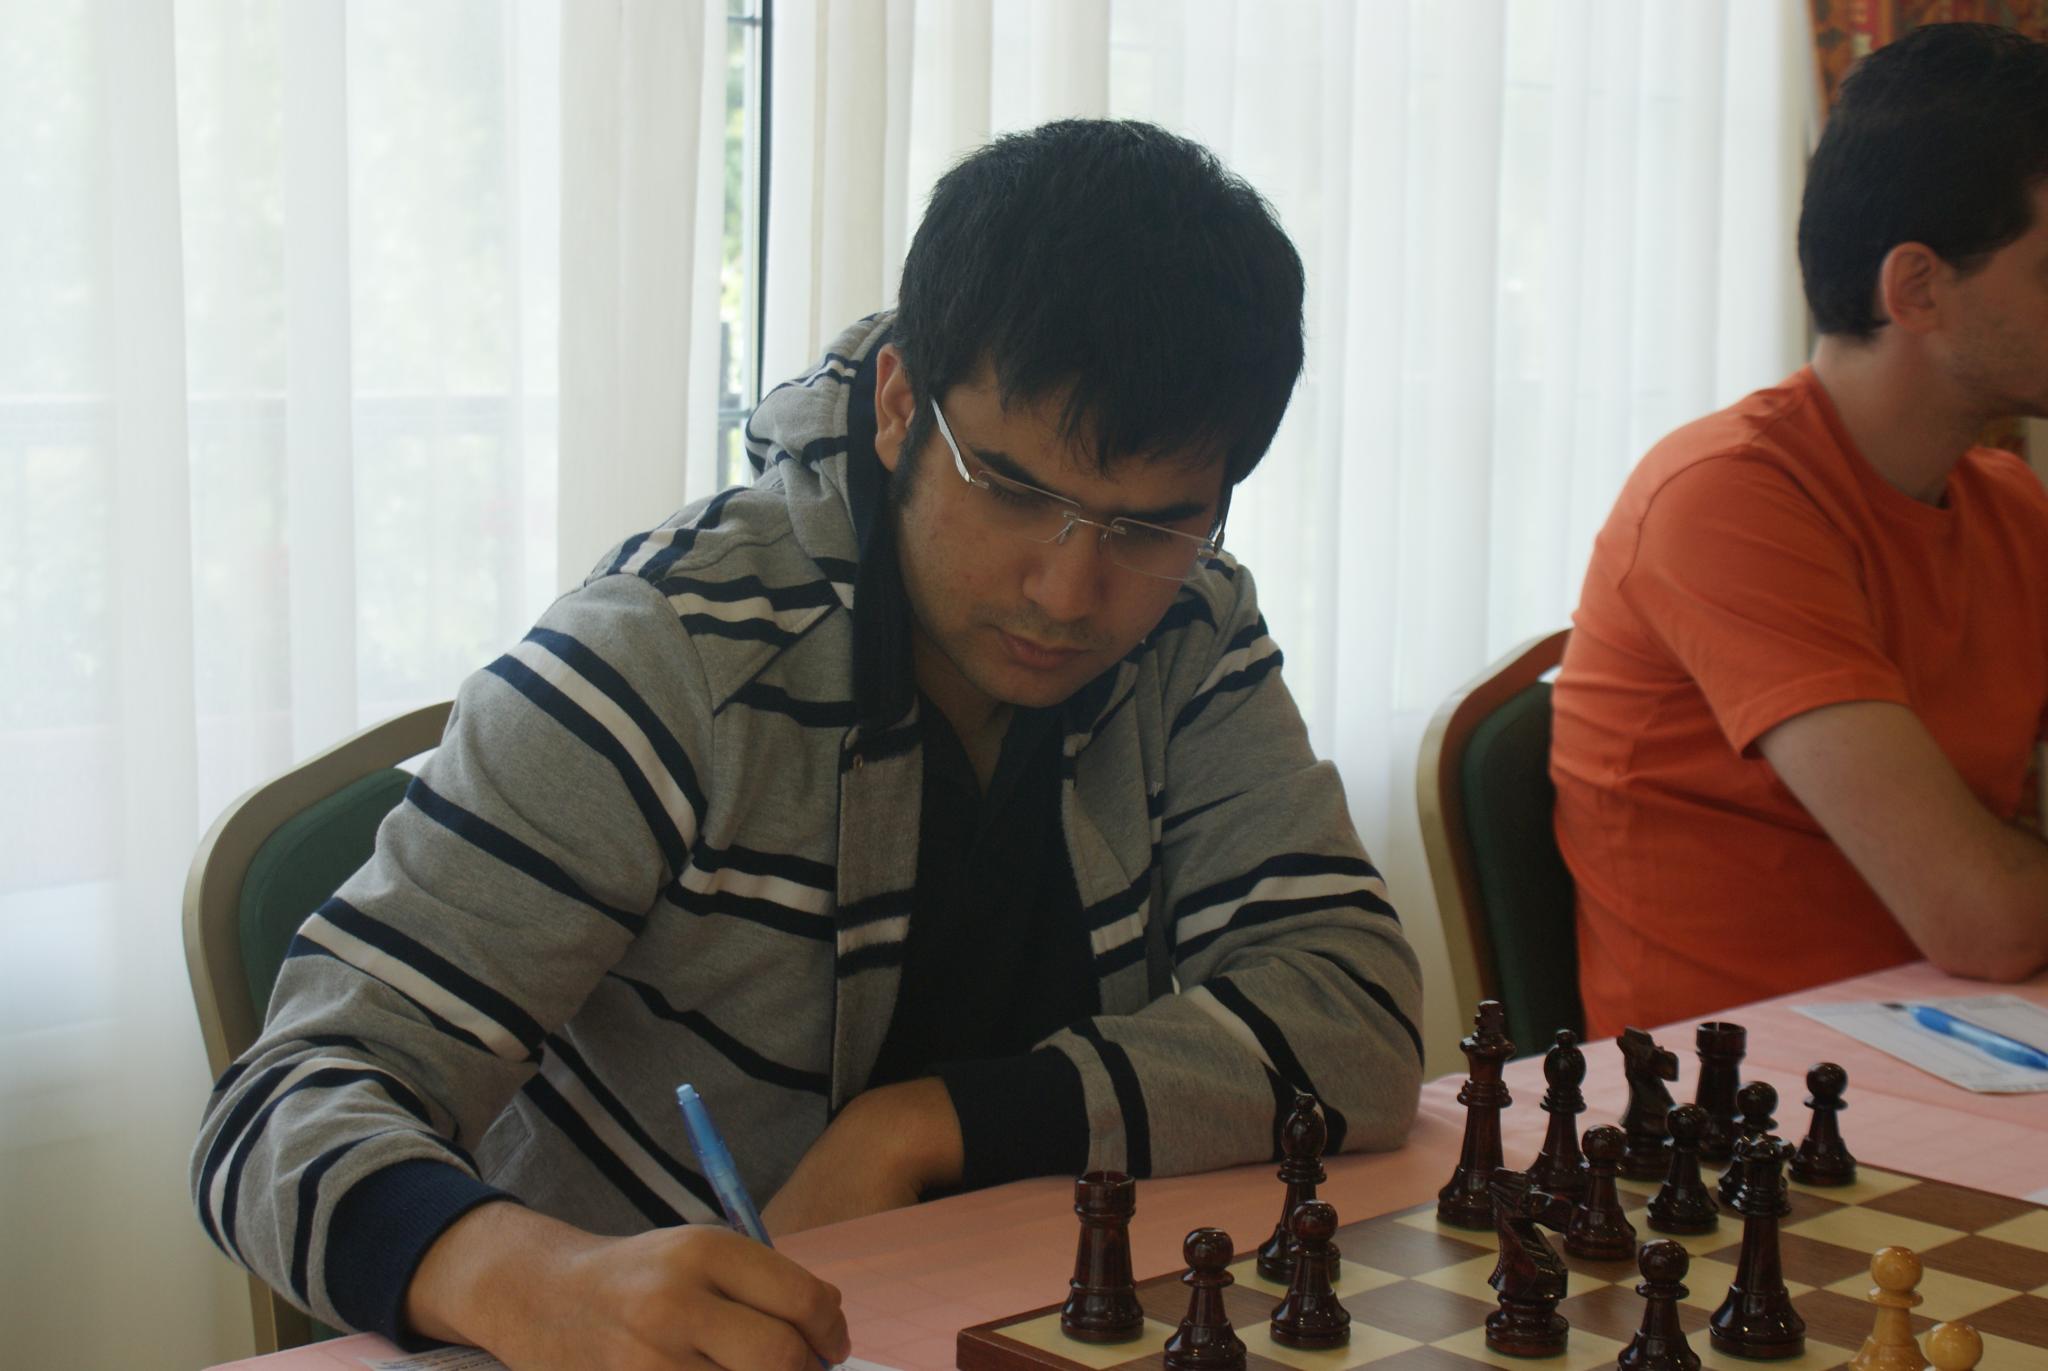 a man playing chess next to another person